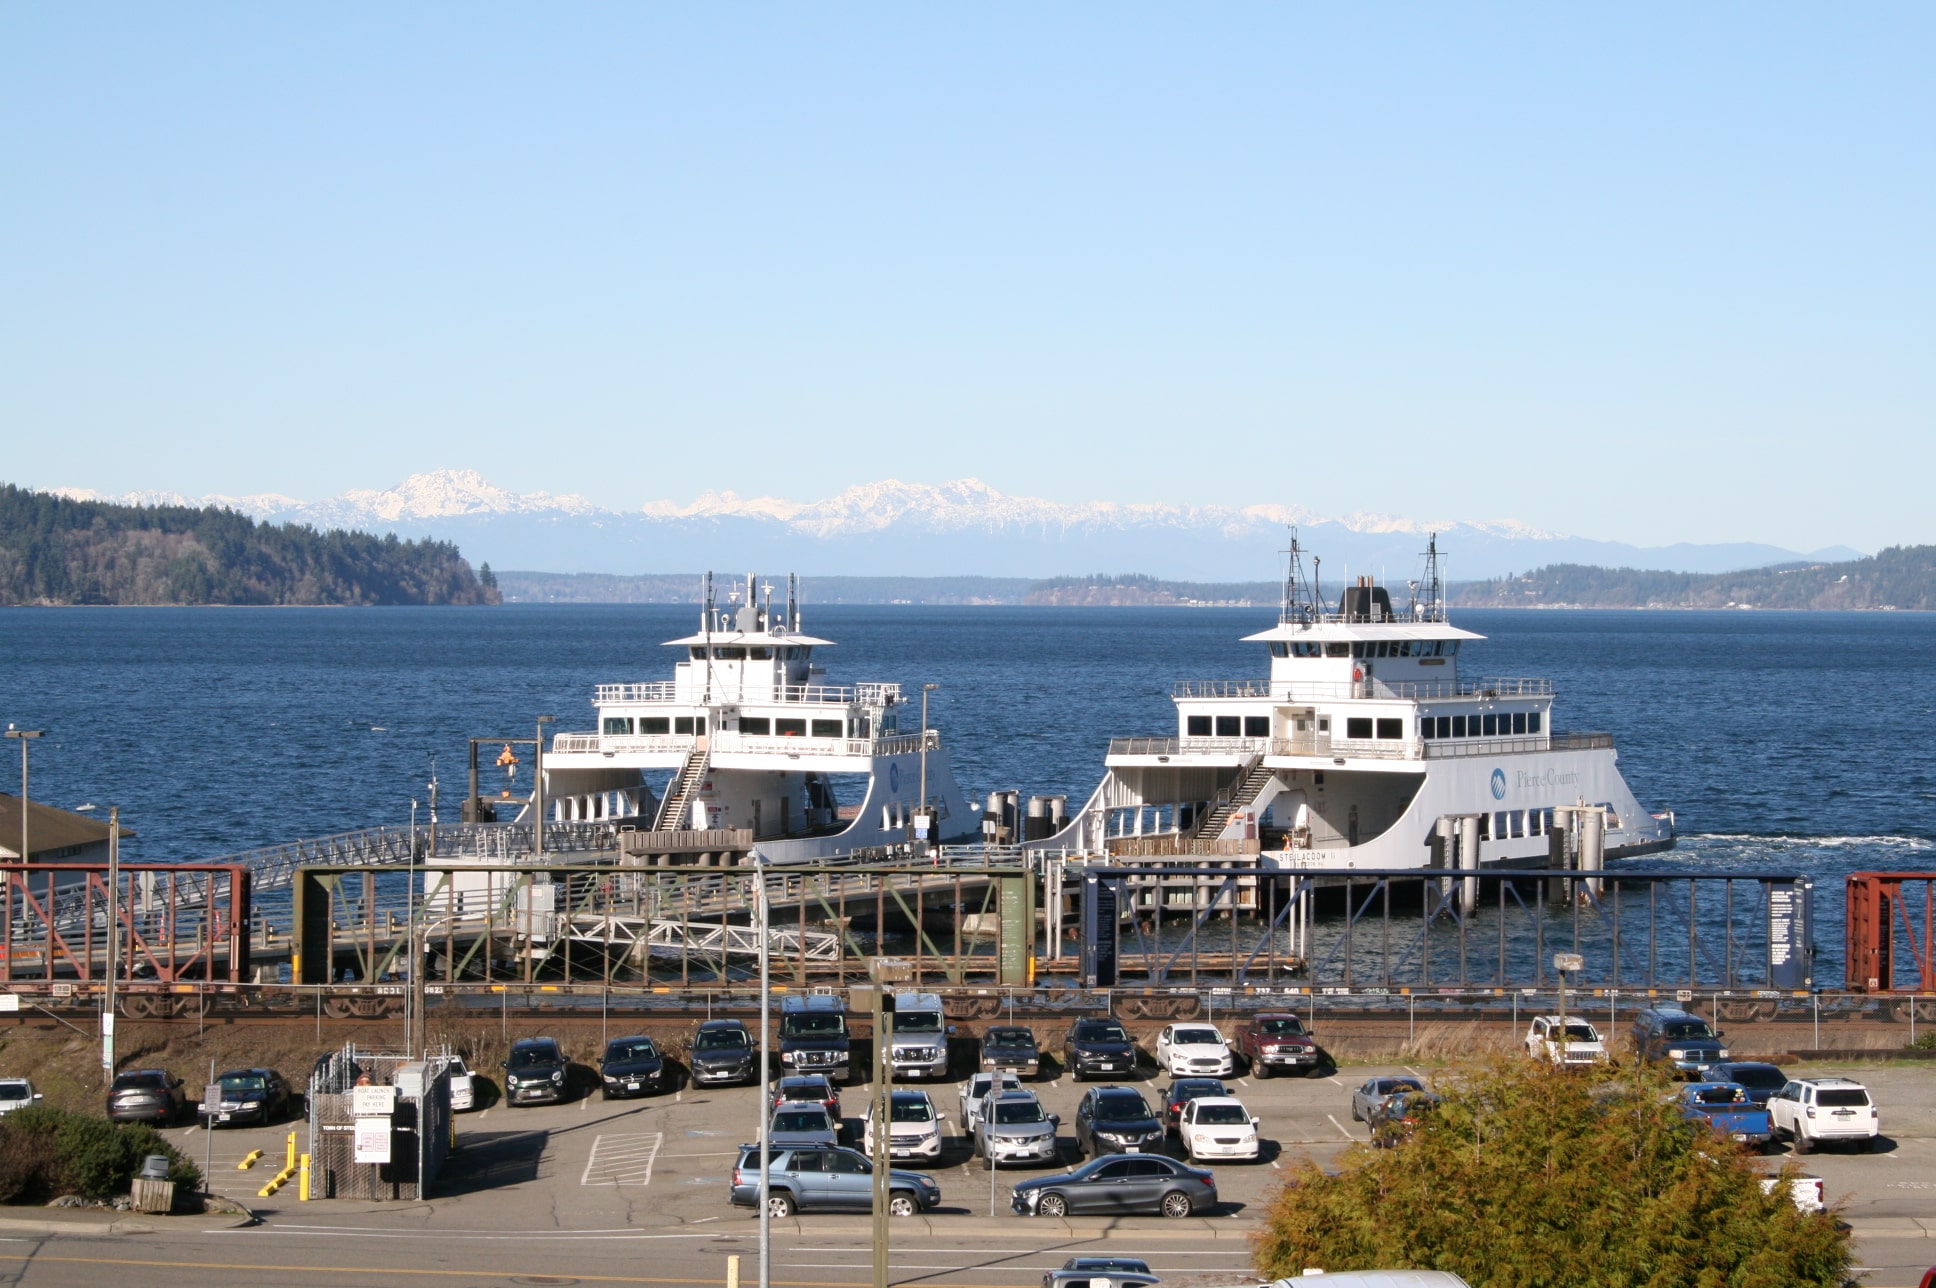 Ferry service between the town of Steilacoom and Anderson and Ketron islands